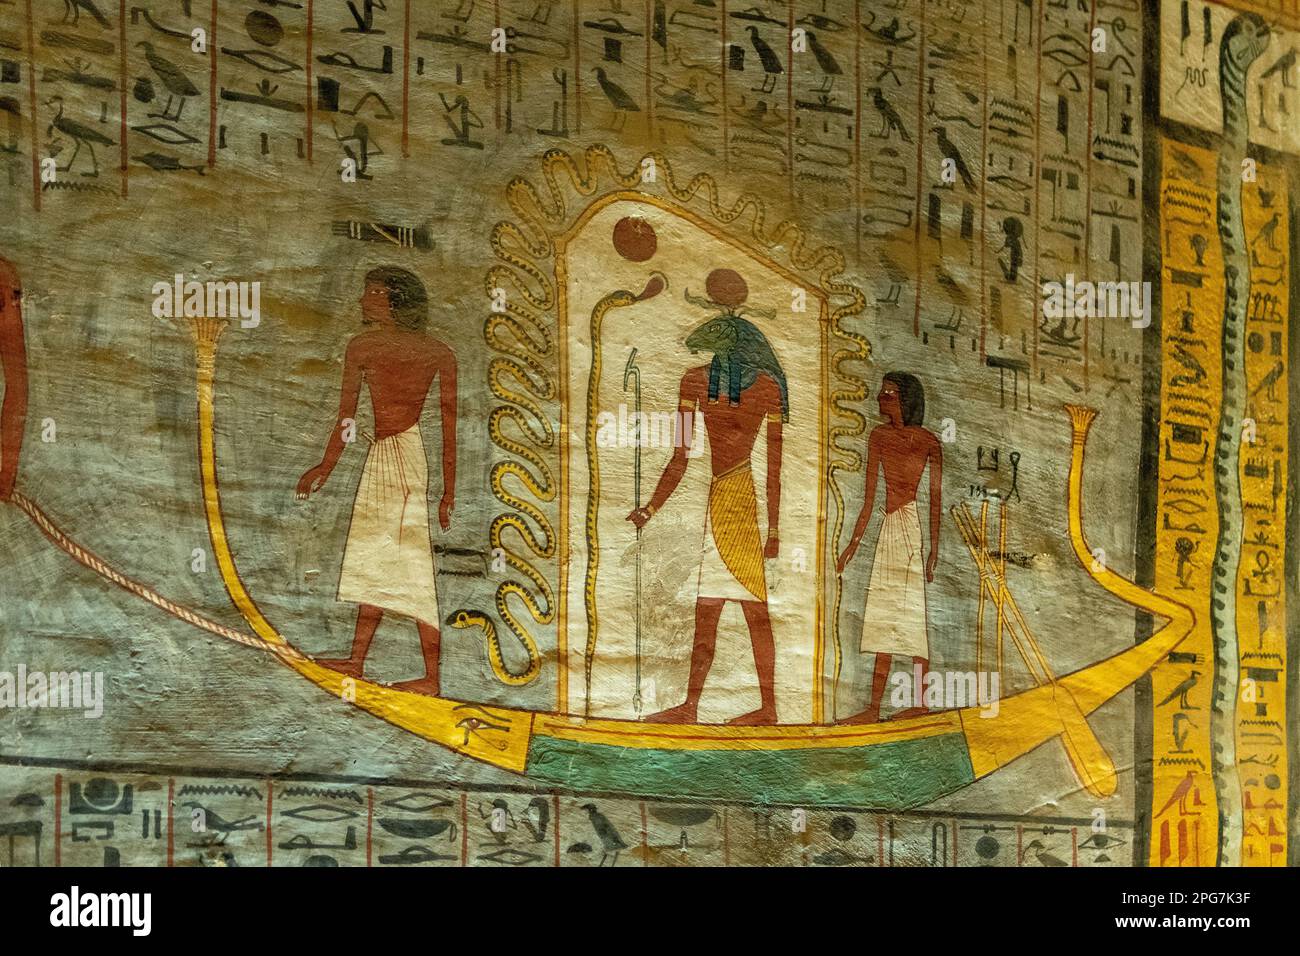 Inside Tomb of Ramesses I, Valley of the Kings, near Luxor, Egypt Stock Photo